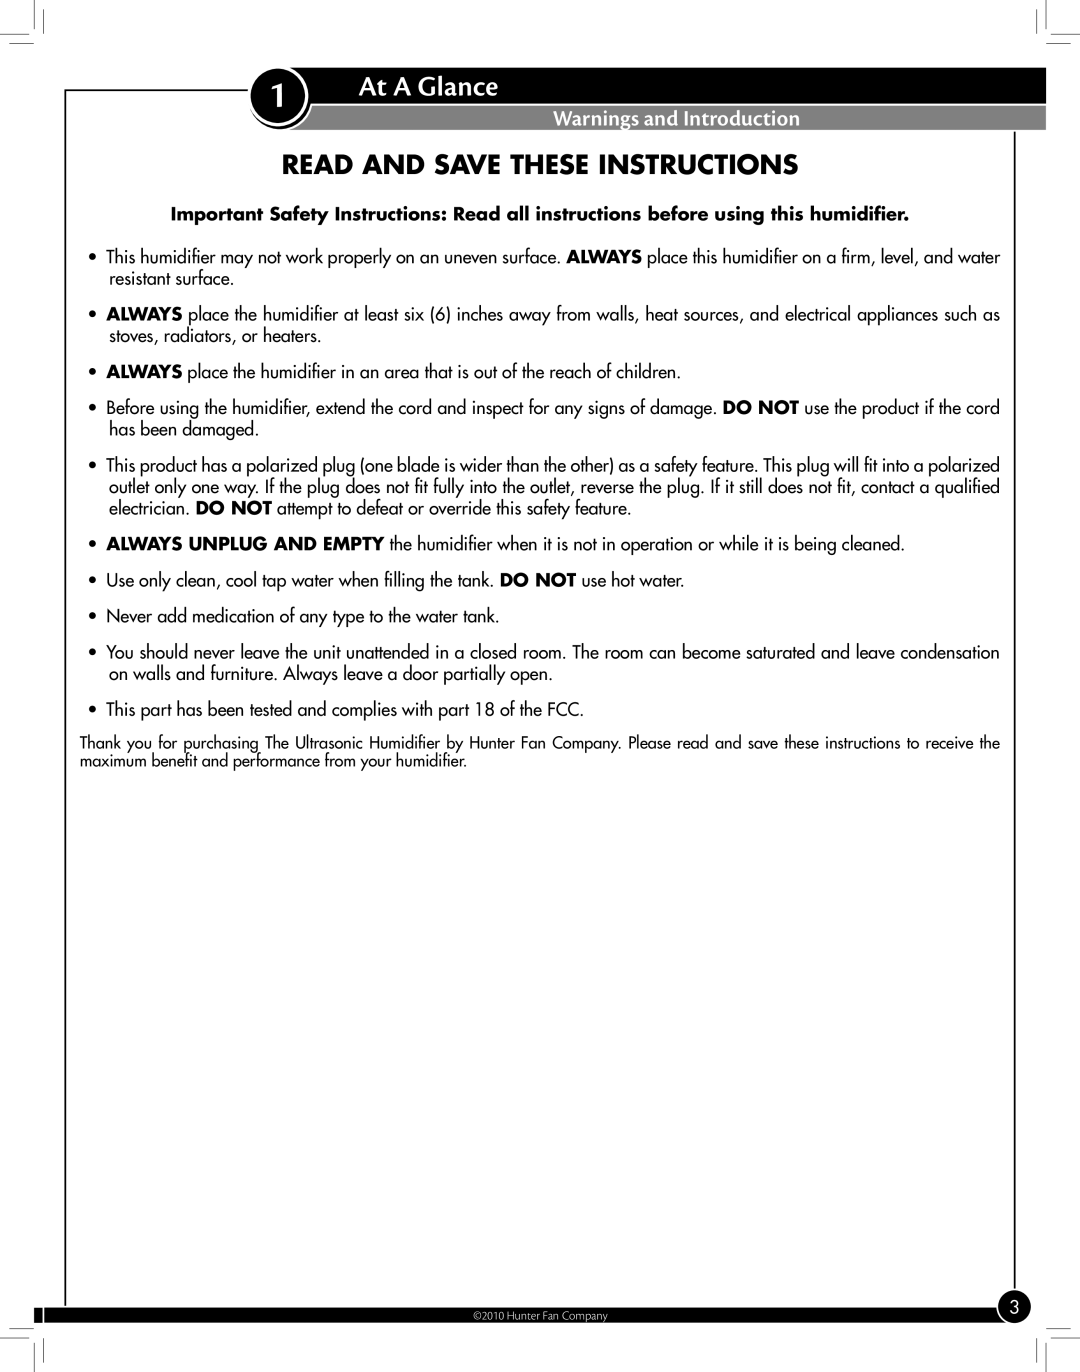 Hunter Fan 31006 manual At A Glance, Read and Save These Instructions, Warnings and Introduction 